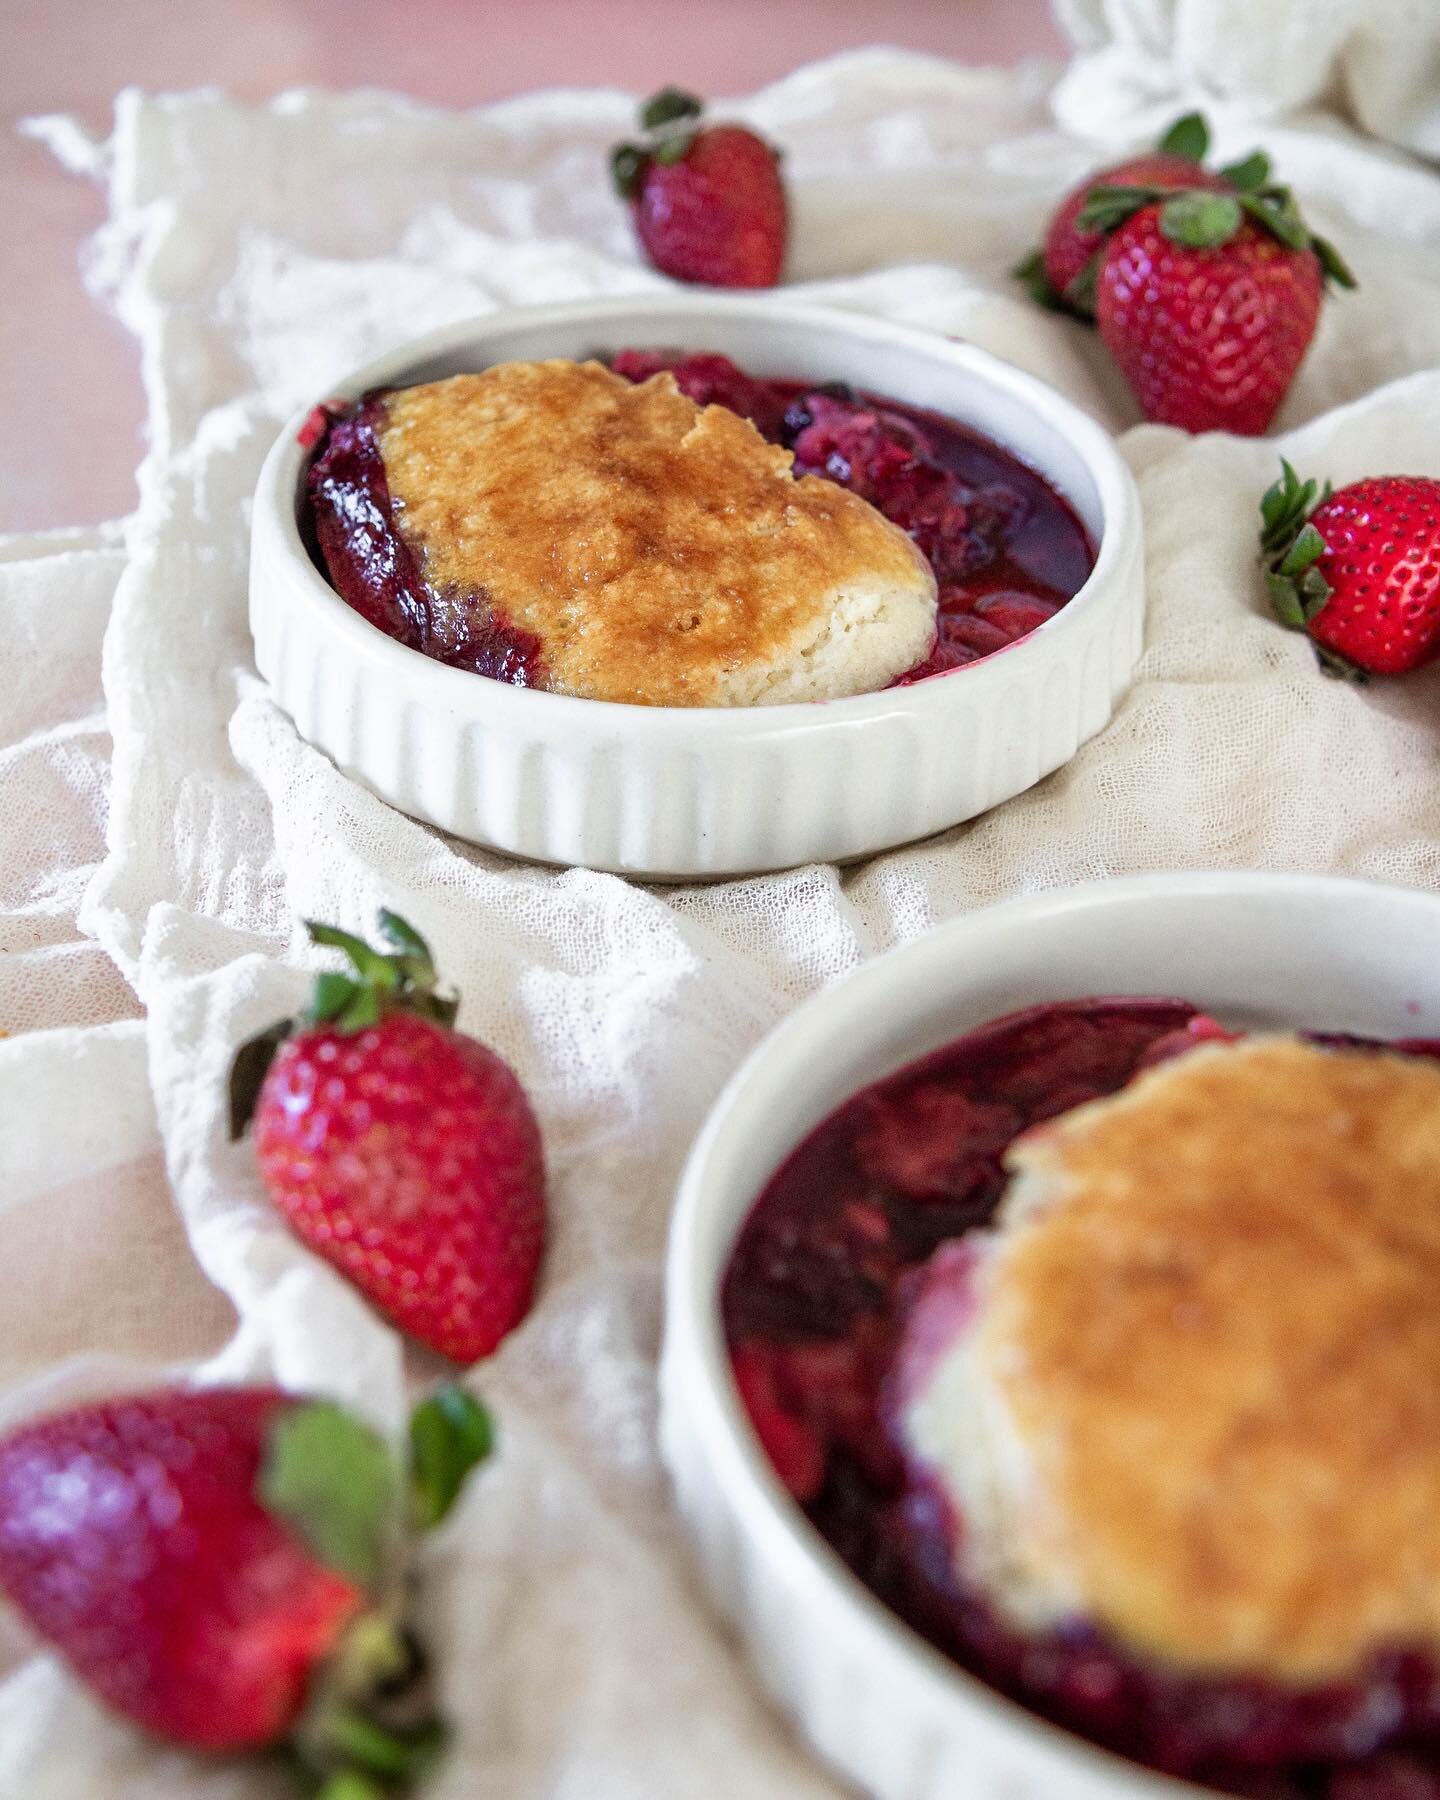 I made a delicious triple berry cobbler this weekend!! Strawberries, blueberries, and blackberries! Ohhh, it was feeling like summer in our house, and I was all about it. 🌞

Interested in knowing more?
perrianndiaz.com 
🔗 in bio!

These plates will